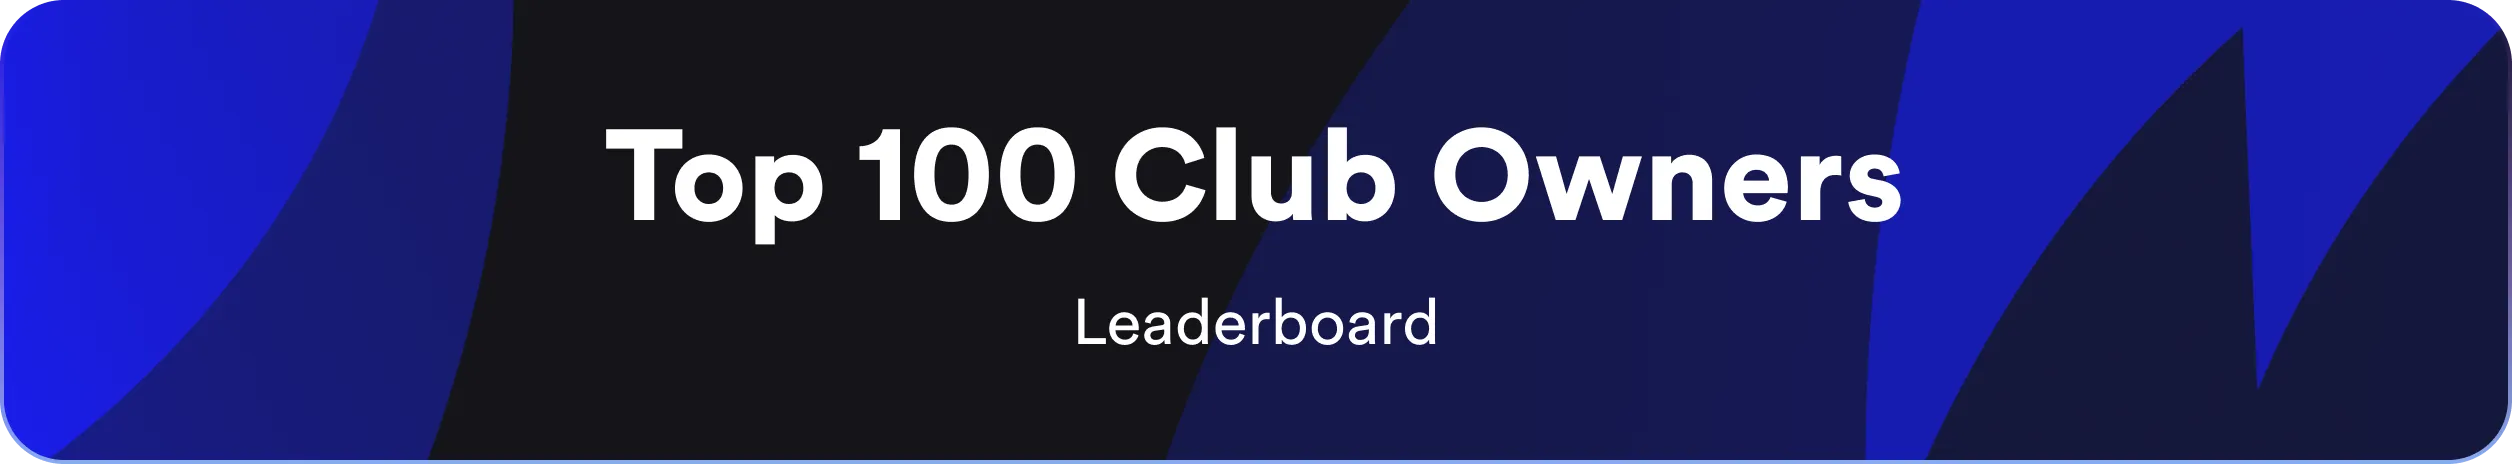 Top 100 Club Owners